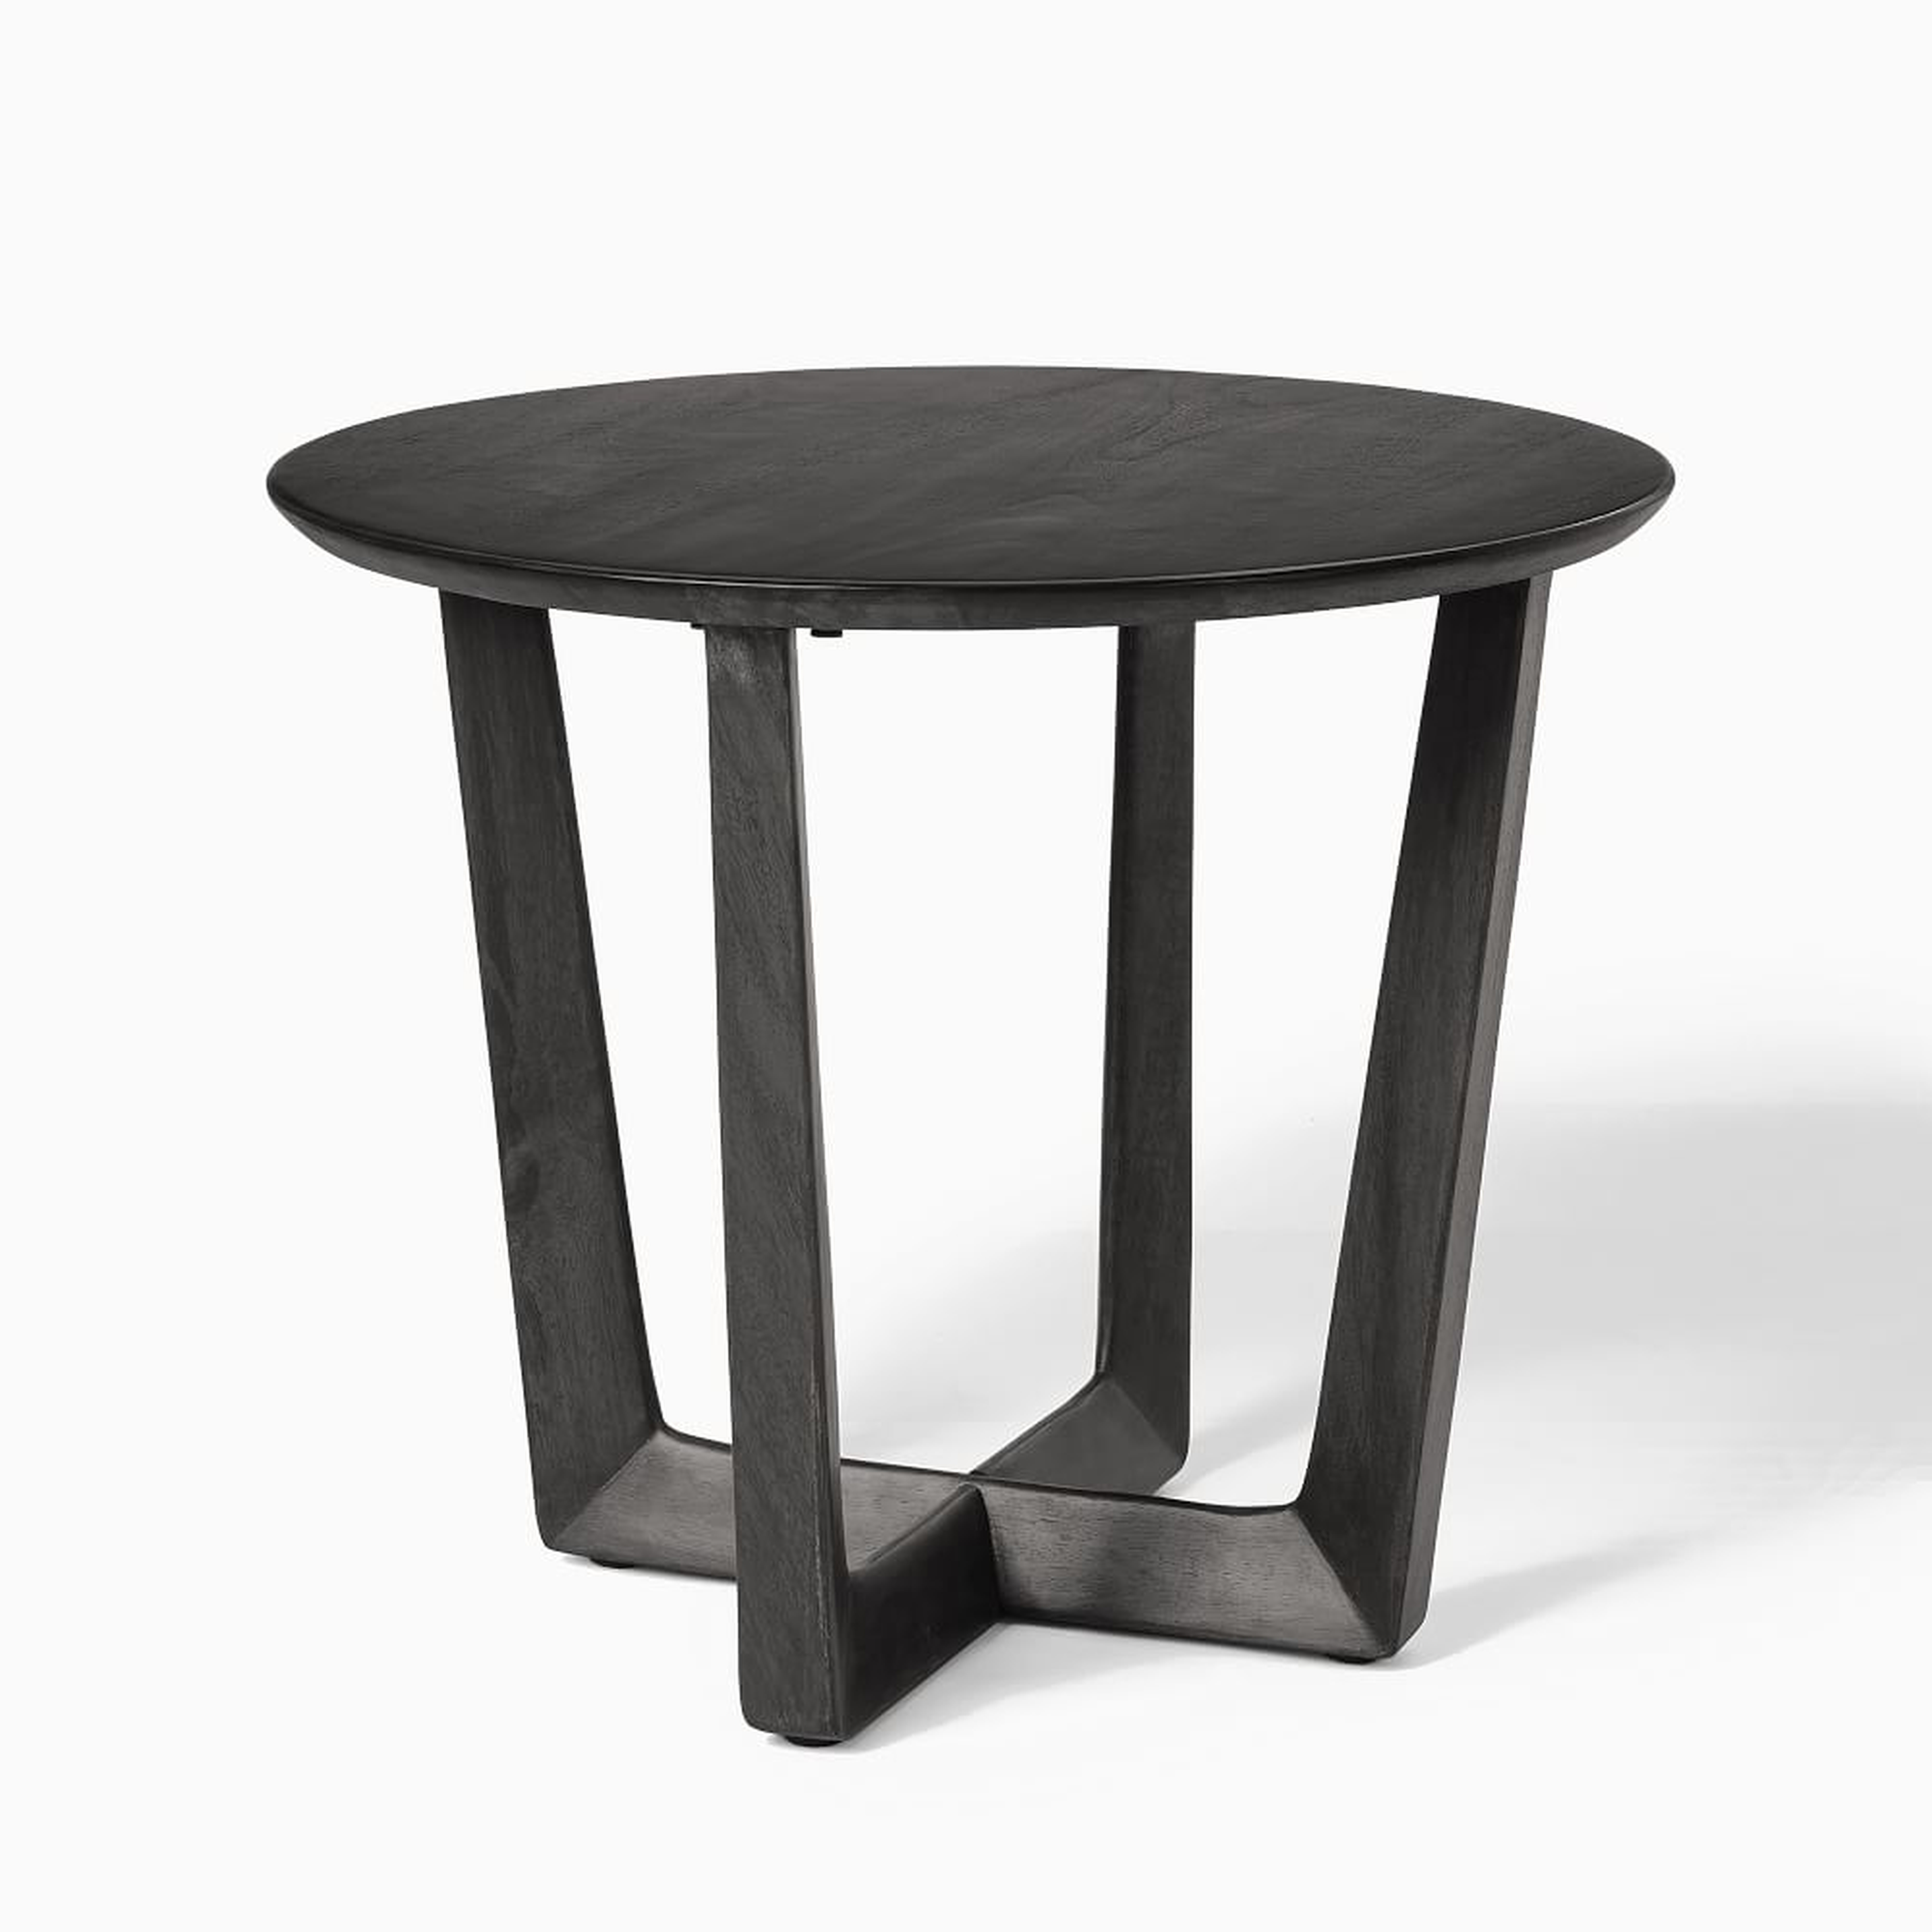 WE Stowe Collection Round Side Table, Black - West Elm